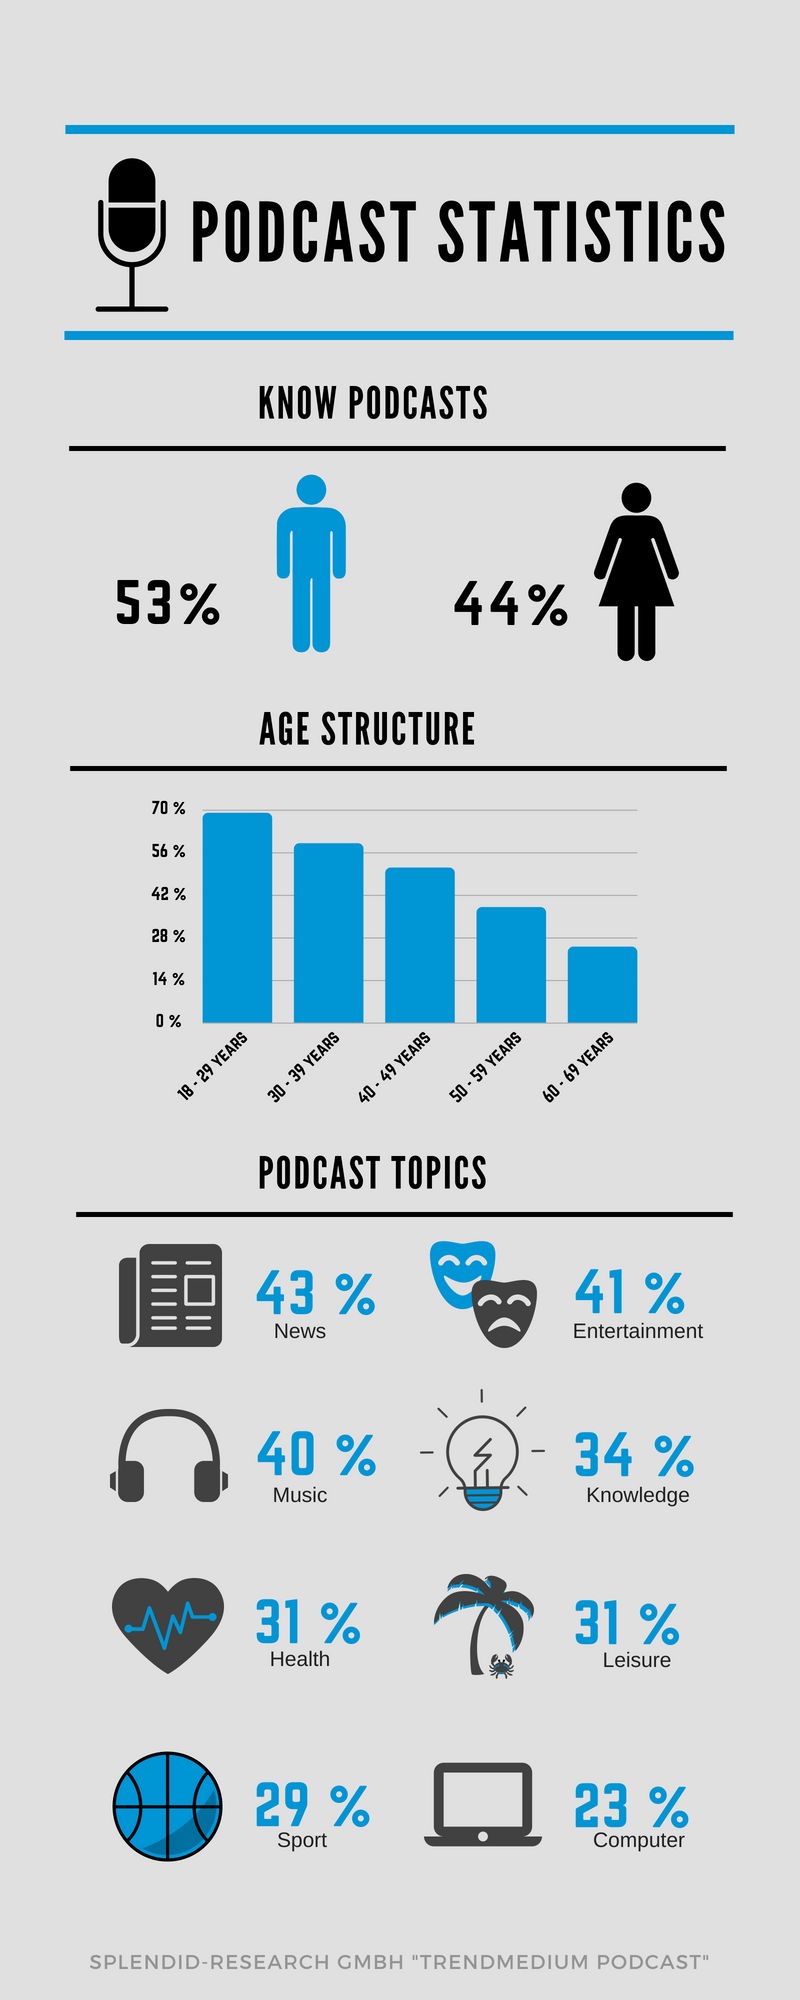 There is a huge variety of topics dealt with in podcasts, the most popular content being news (43%) and entertainment (41%). These data are used with the kind permission of Splendid Research GmbH.